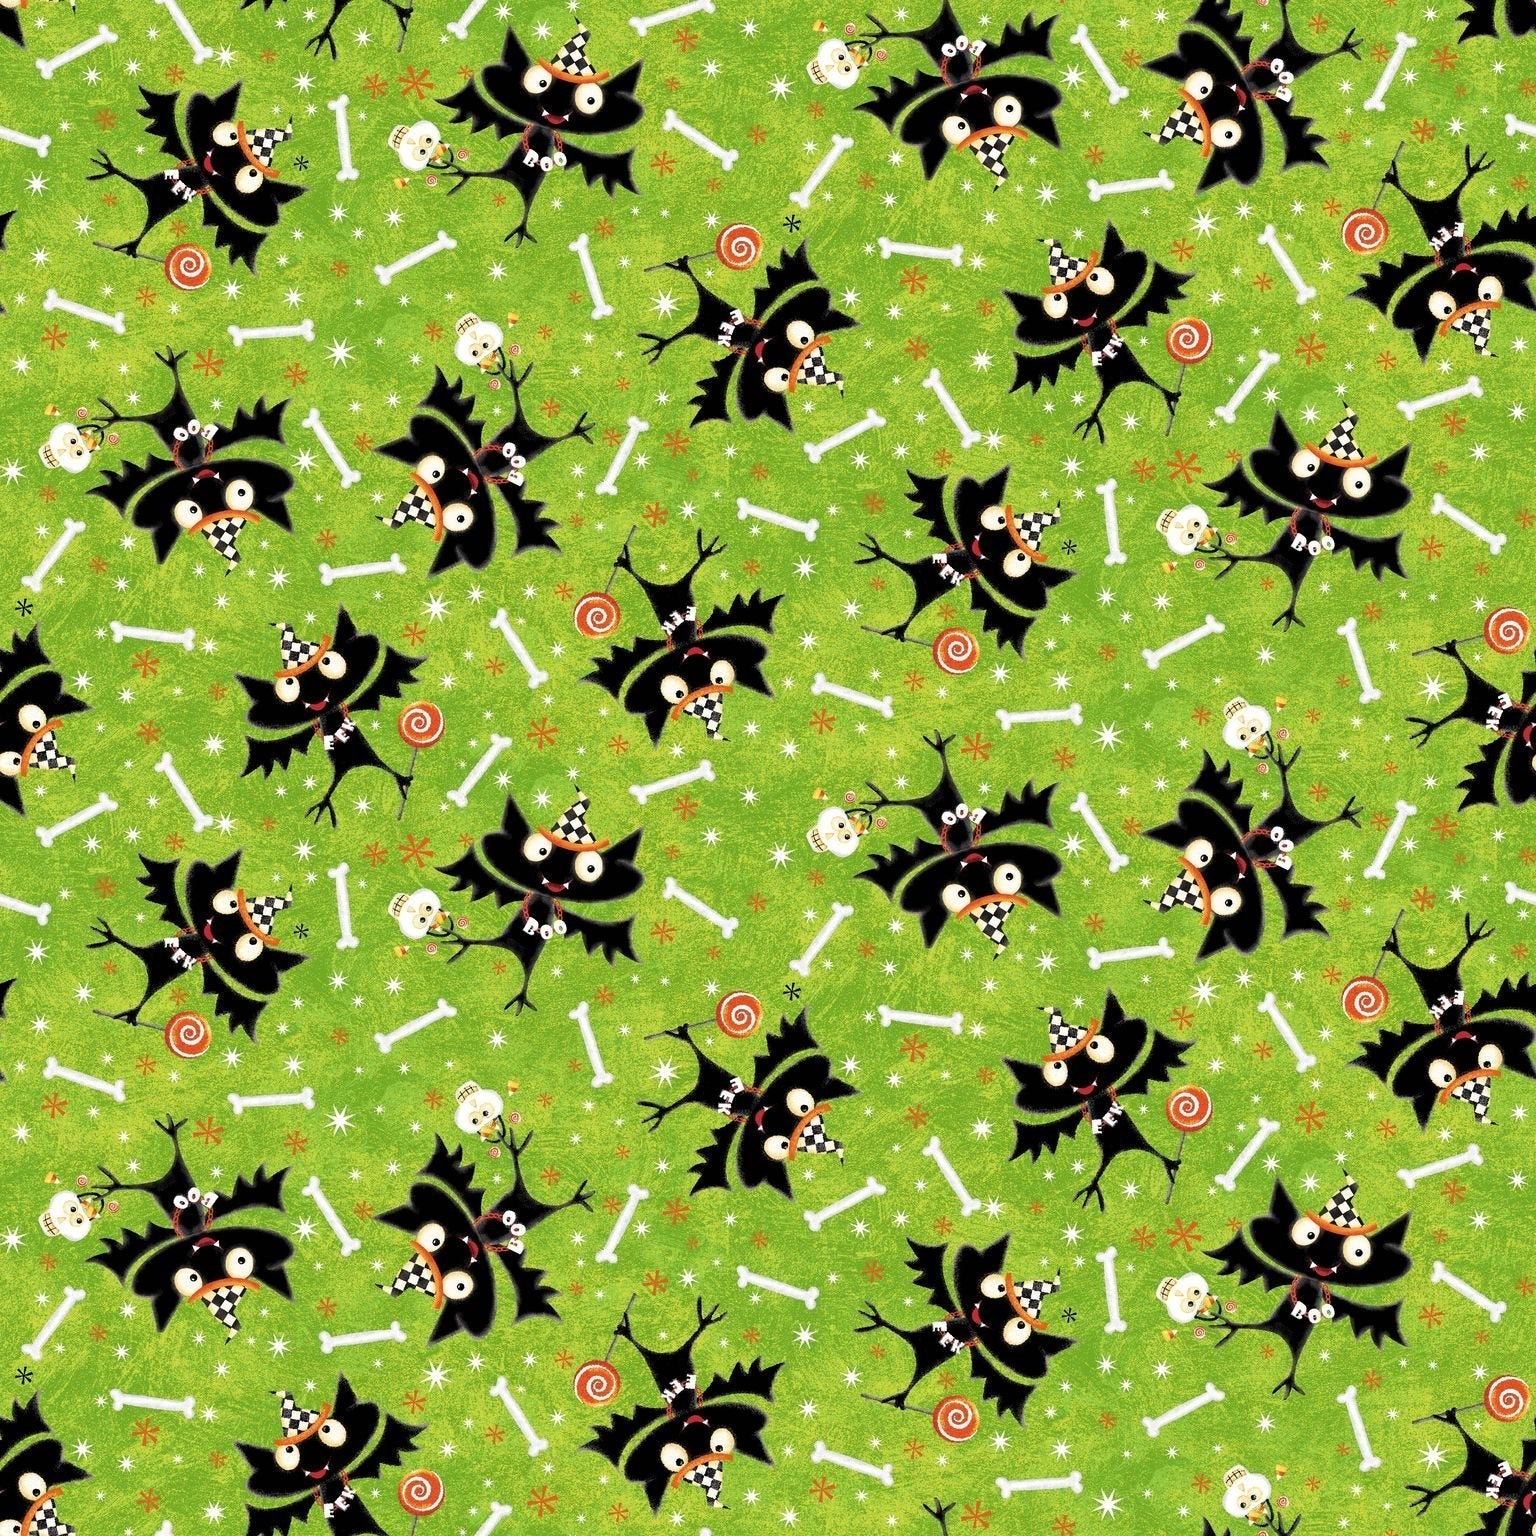 henry glass Fabric Glow Bats on Green Halloween Glow in the Dark Fabric by Henry Glass